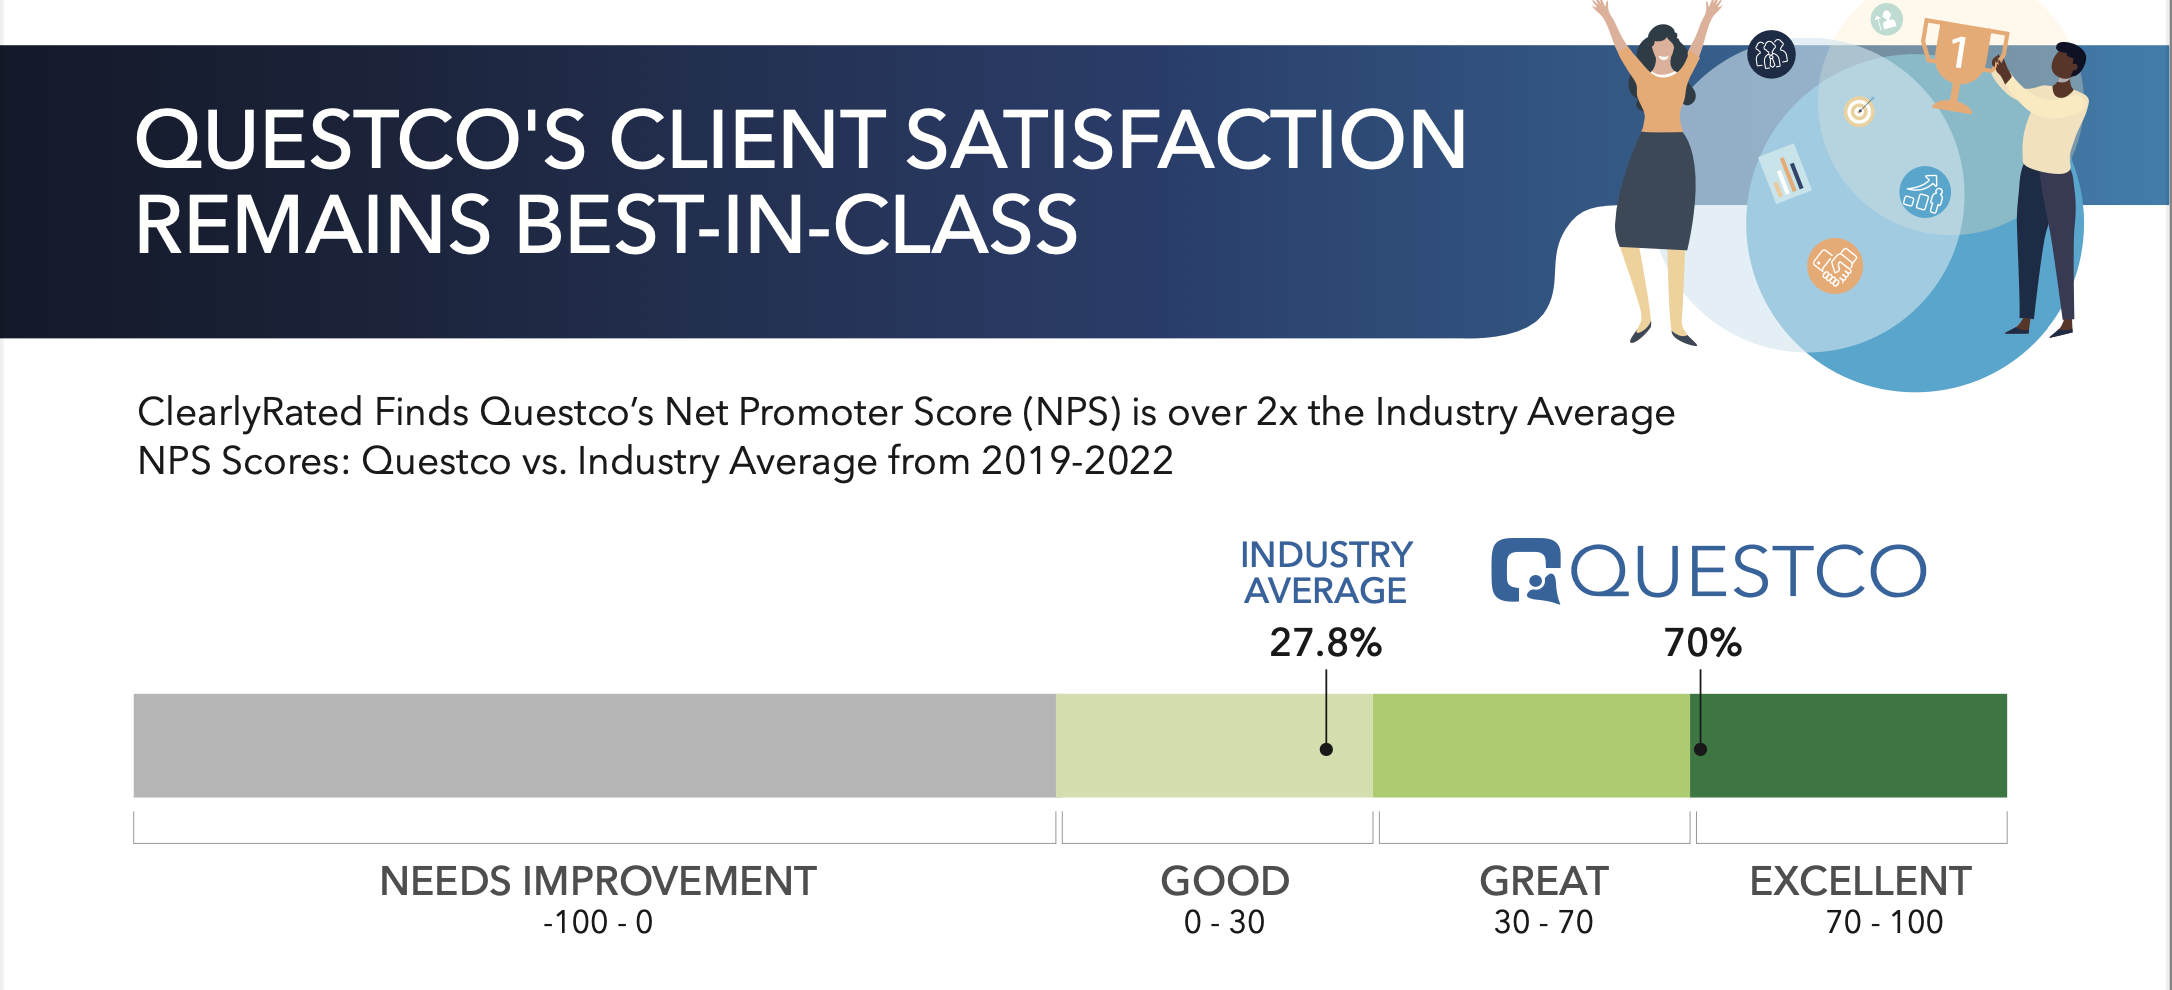 Reasons Questco's NPS Remains Best-in-Class